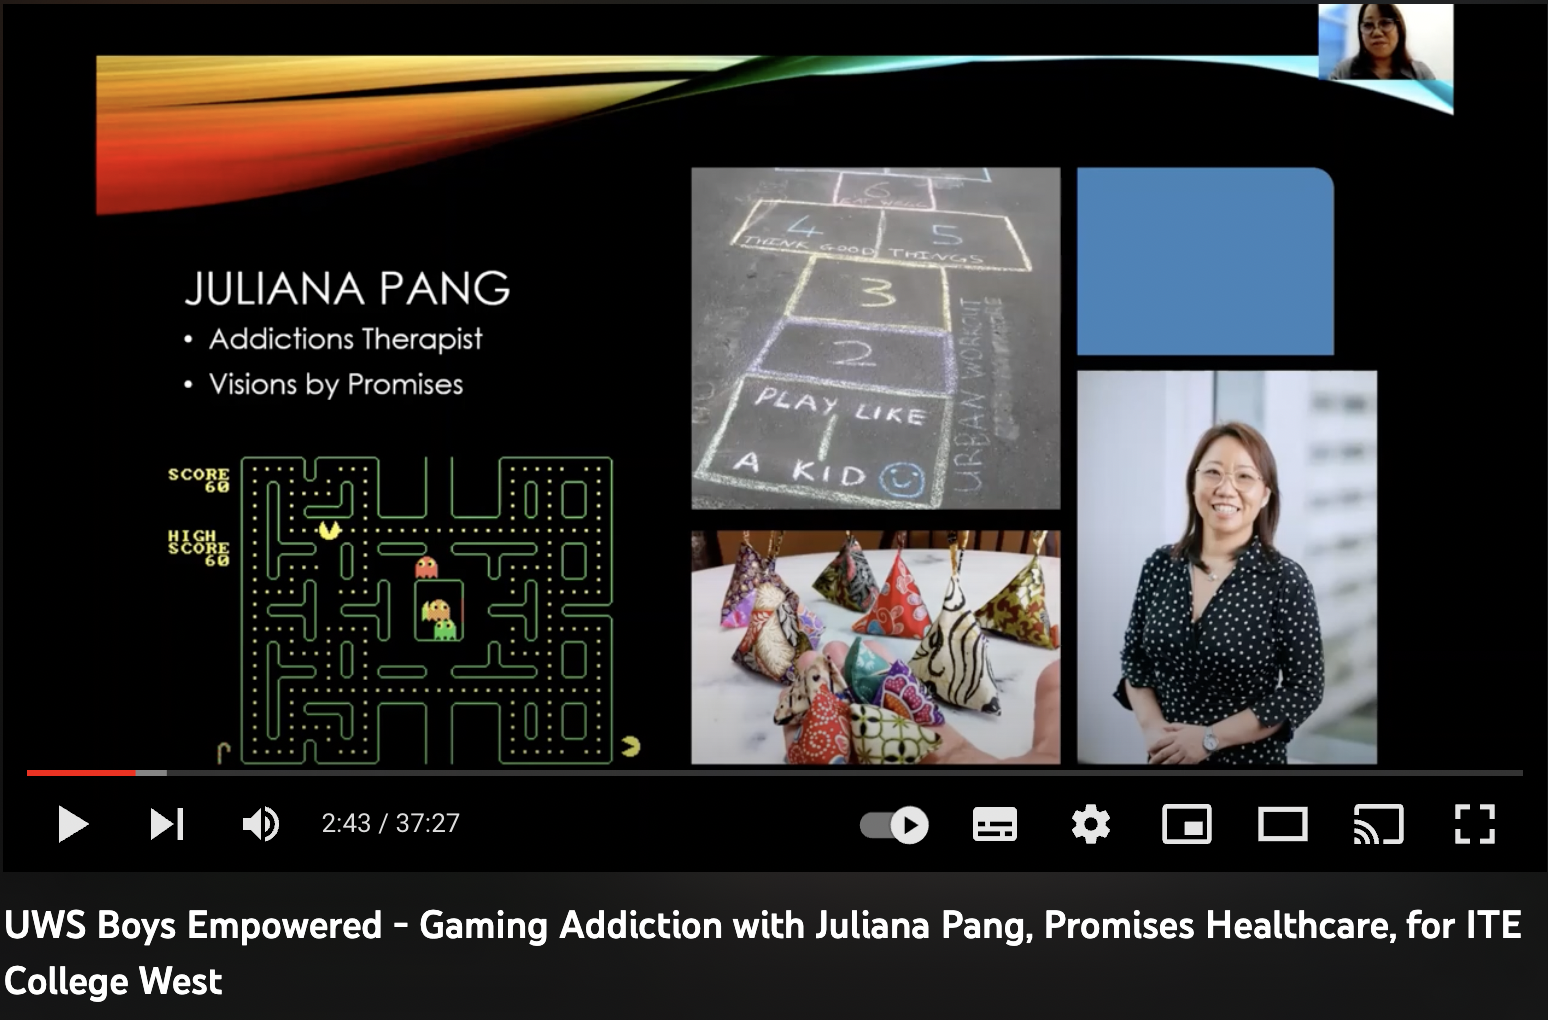 UWS Boys Empowered – Gaming Addiction with Juliana Pang, Promises Healthcare, for ITE College West